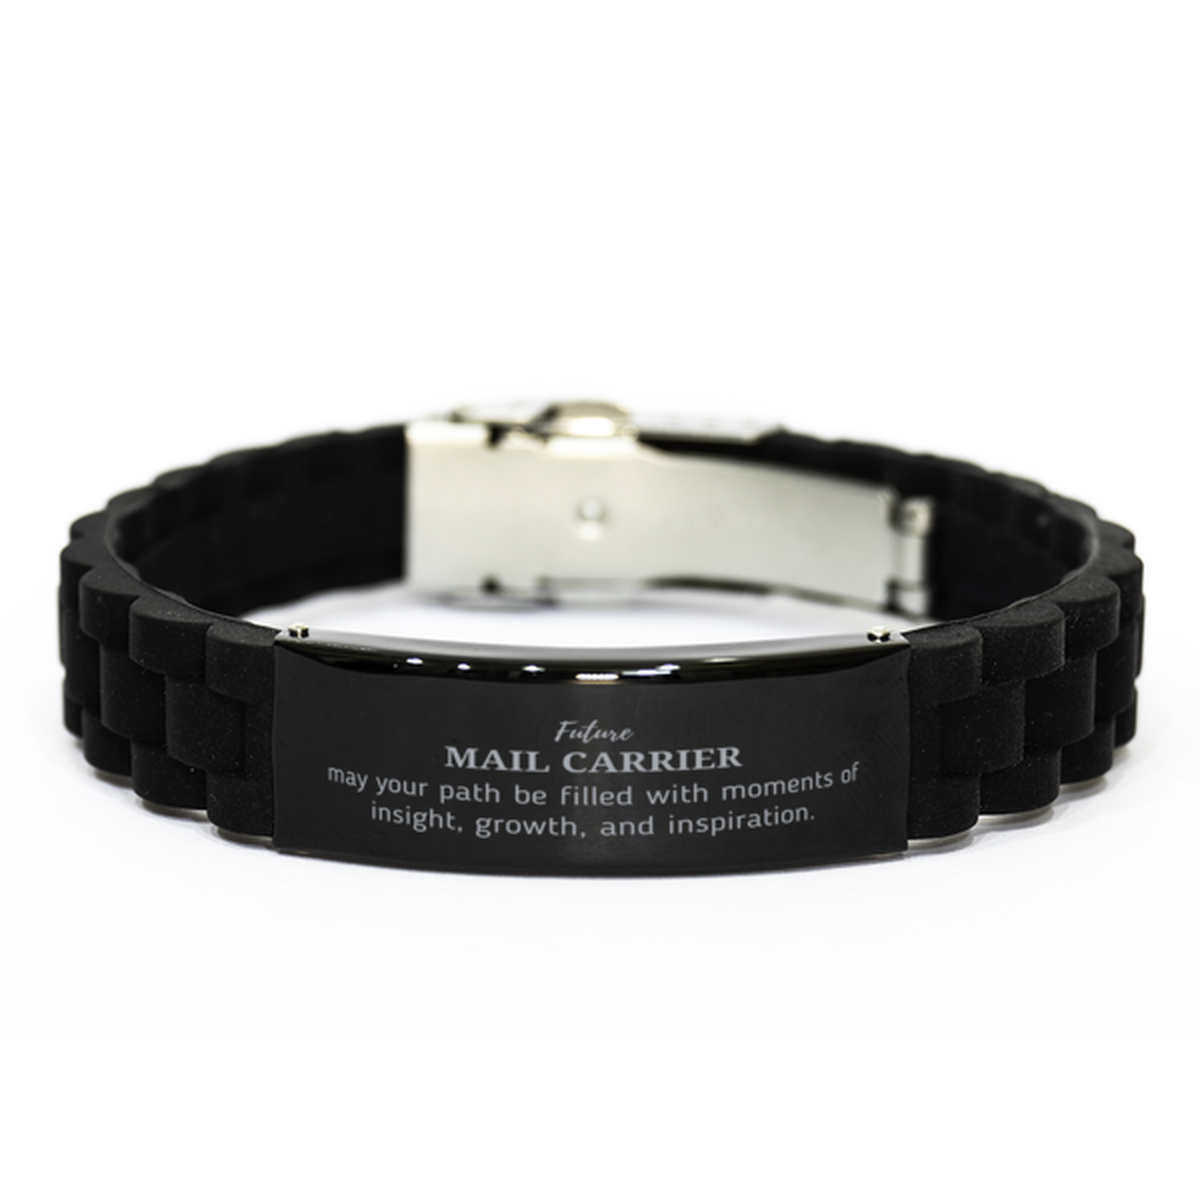 Future Mail Carrier Gifts, May your path be filled with moments of insight, Graduation Gifts for New Mail Carrier, Christmas Unique Black Glidelock Clasp Bracelet For Men, Women, Friends